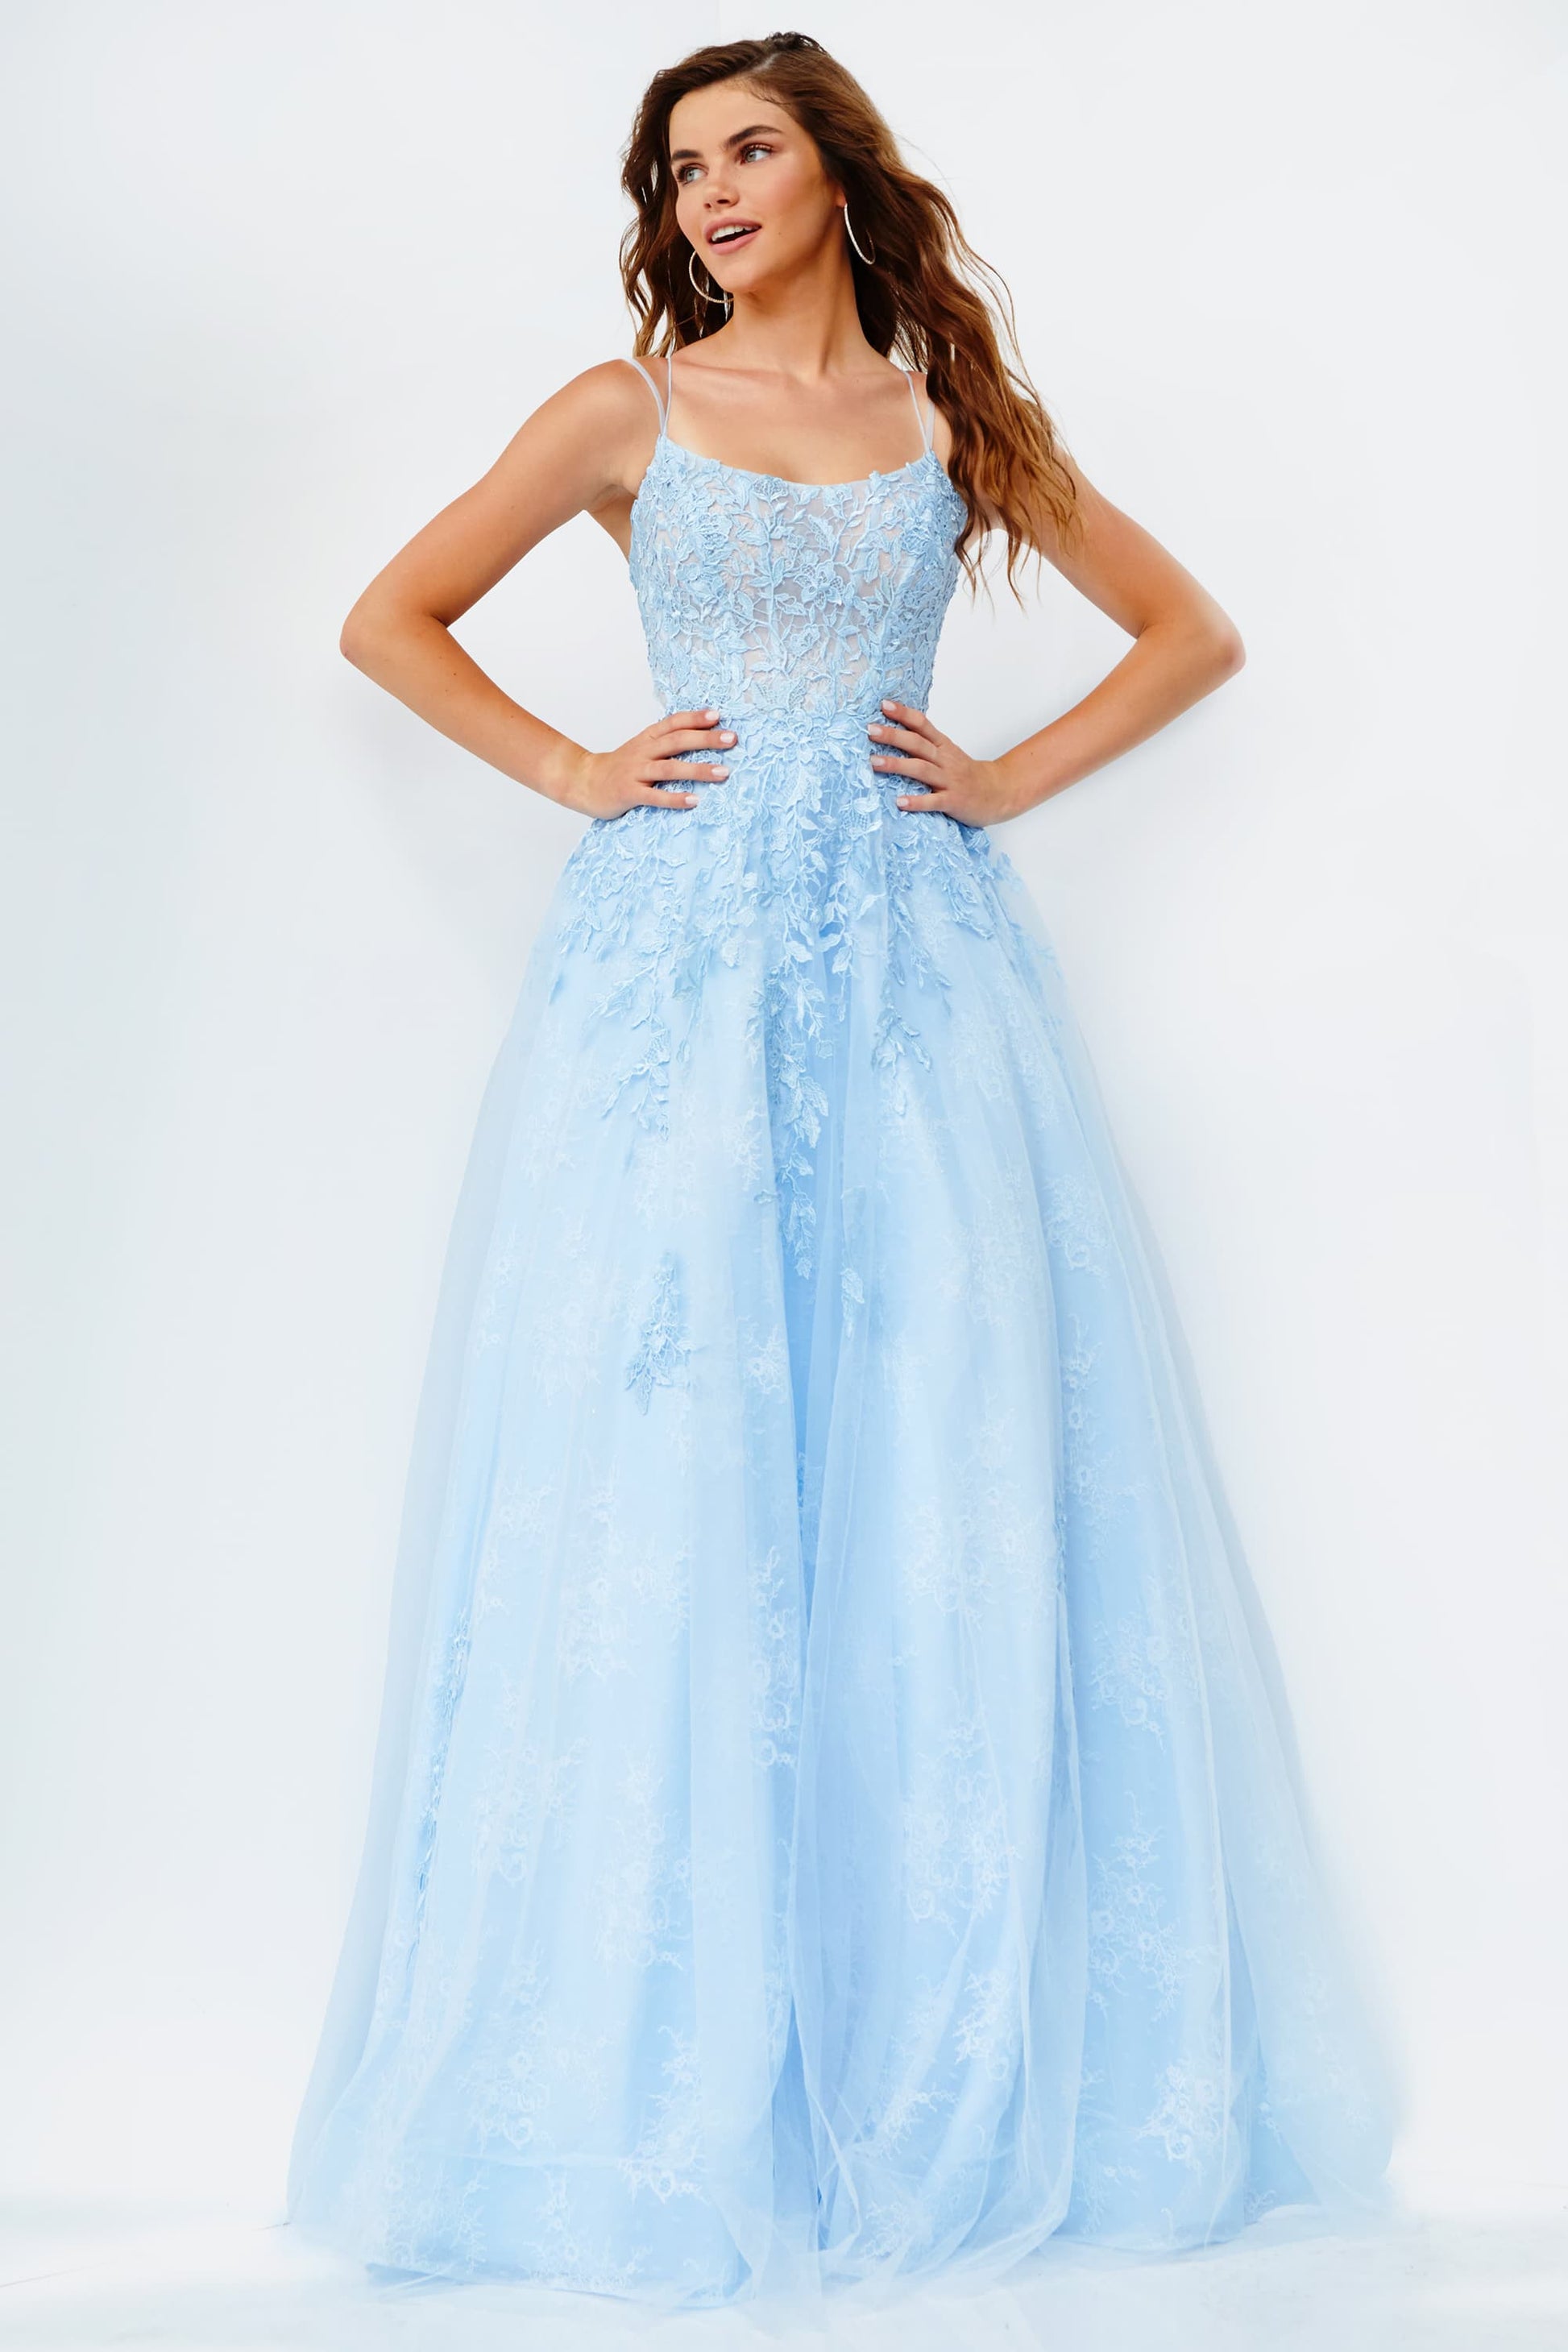 Jovani JVN06644 is a Long Lush Ballgown Prom Dress. This gown features a sheer fitted bodice with a scoop neckline and spaghetti straps. Floral lace appliques Embellish the top and cascade down into the full a line skirt. Open corset lace up tie back with a sweeping train light blue